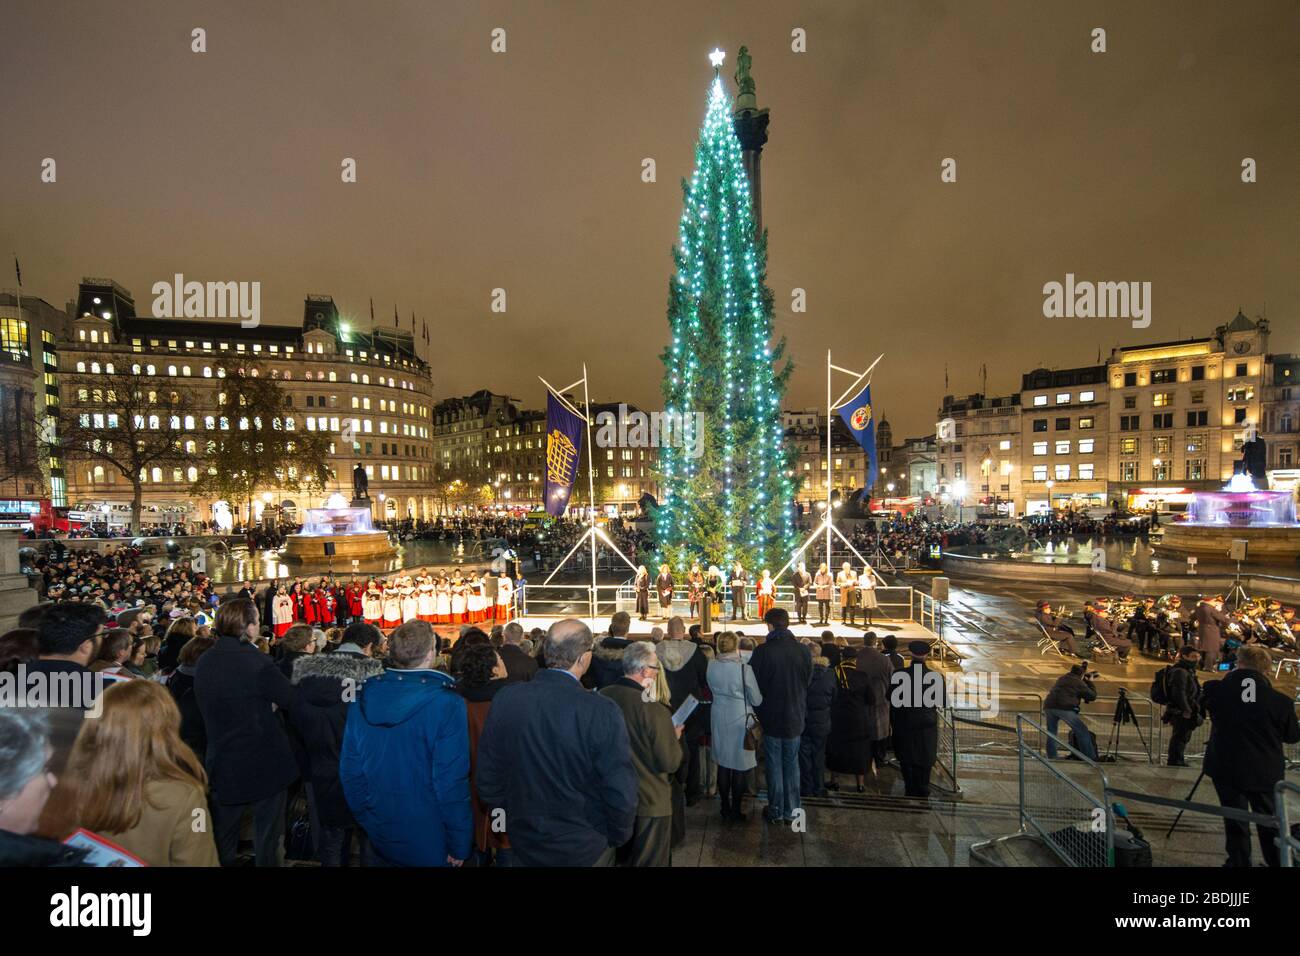 The Trafalgar Square Christmas tree is a Christmas tree donated to the people of Britain by the city of Oslo, Norway each year since 1947 Stock Photo